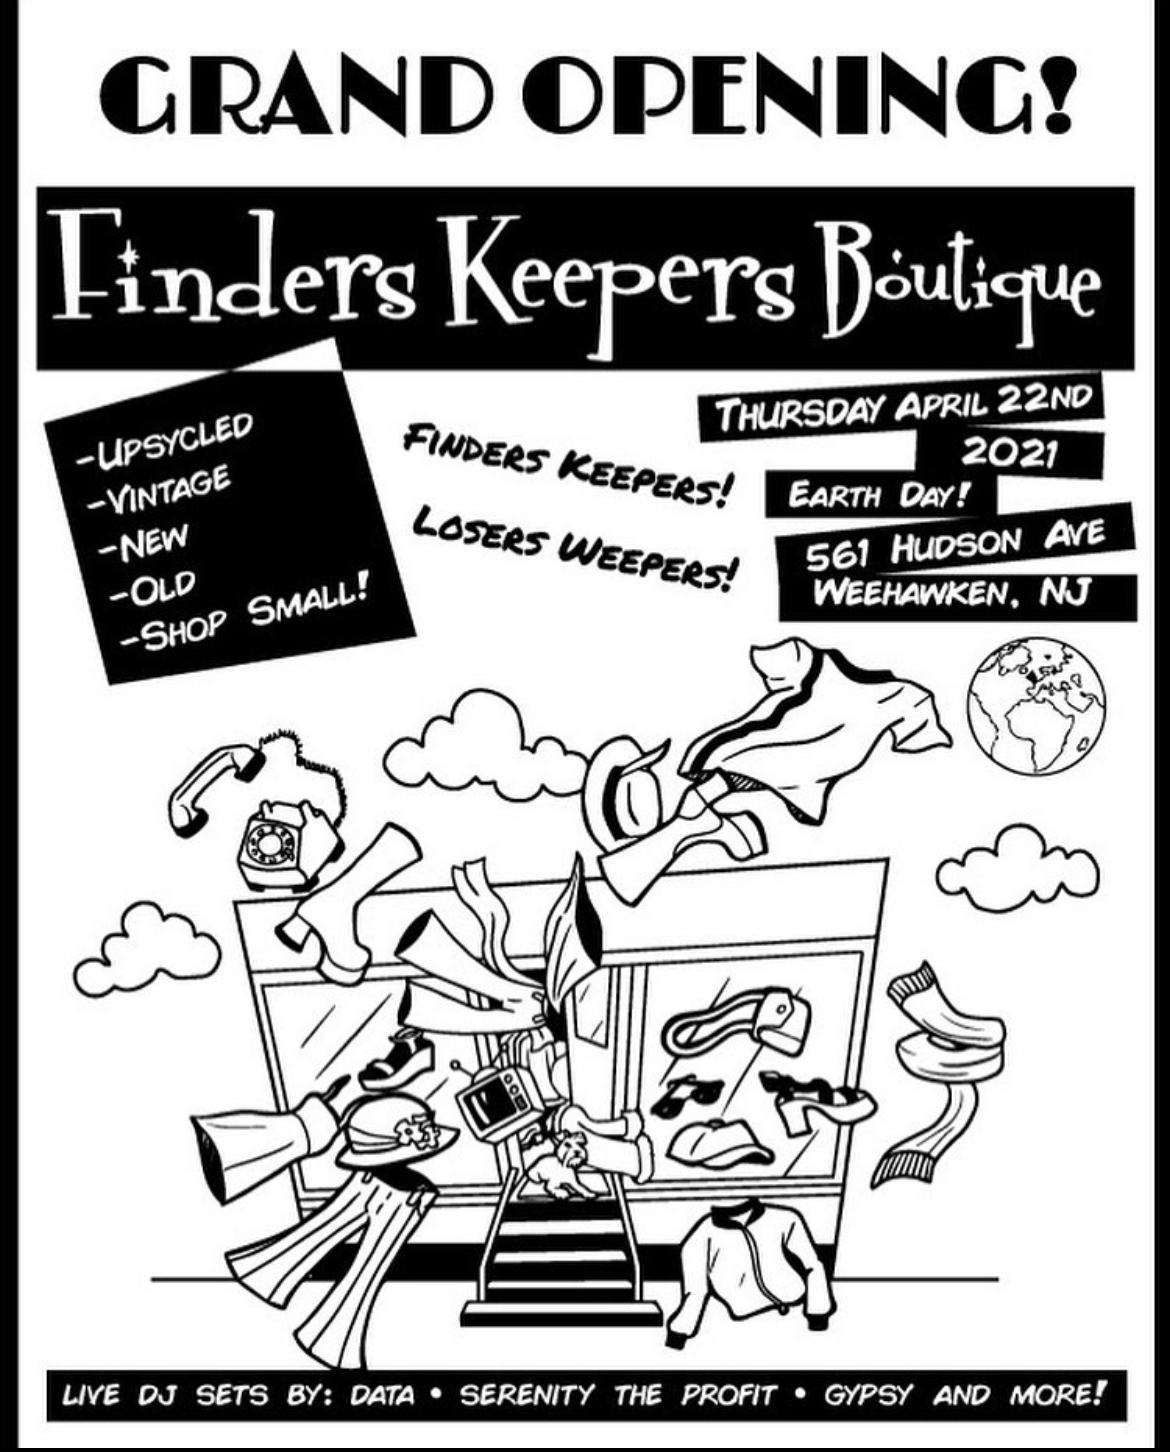 finders keepers boutique flyer